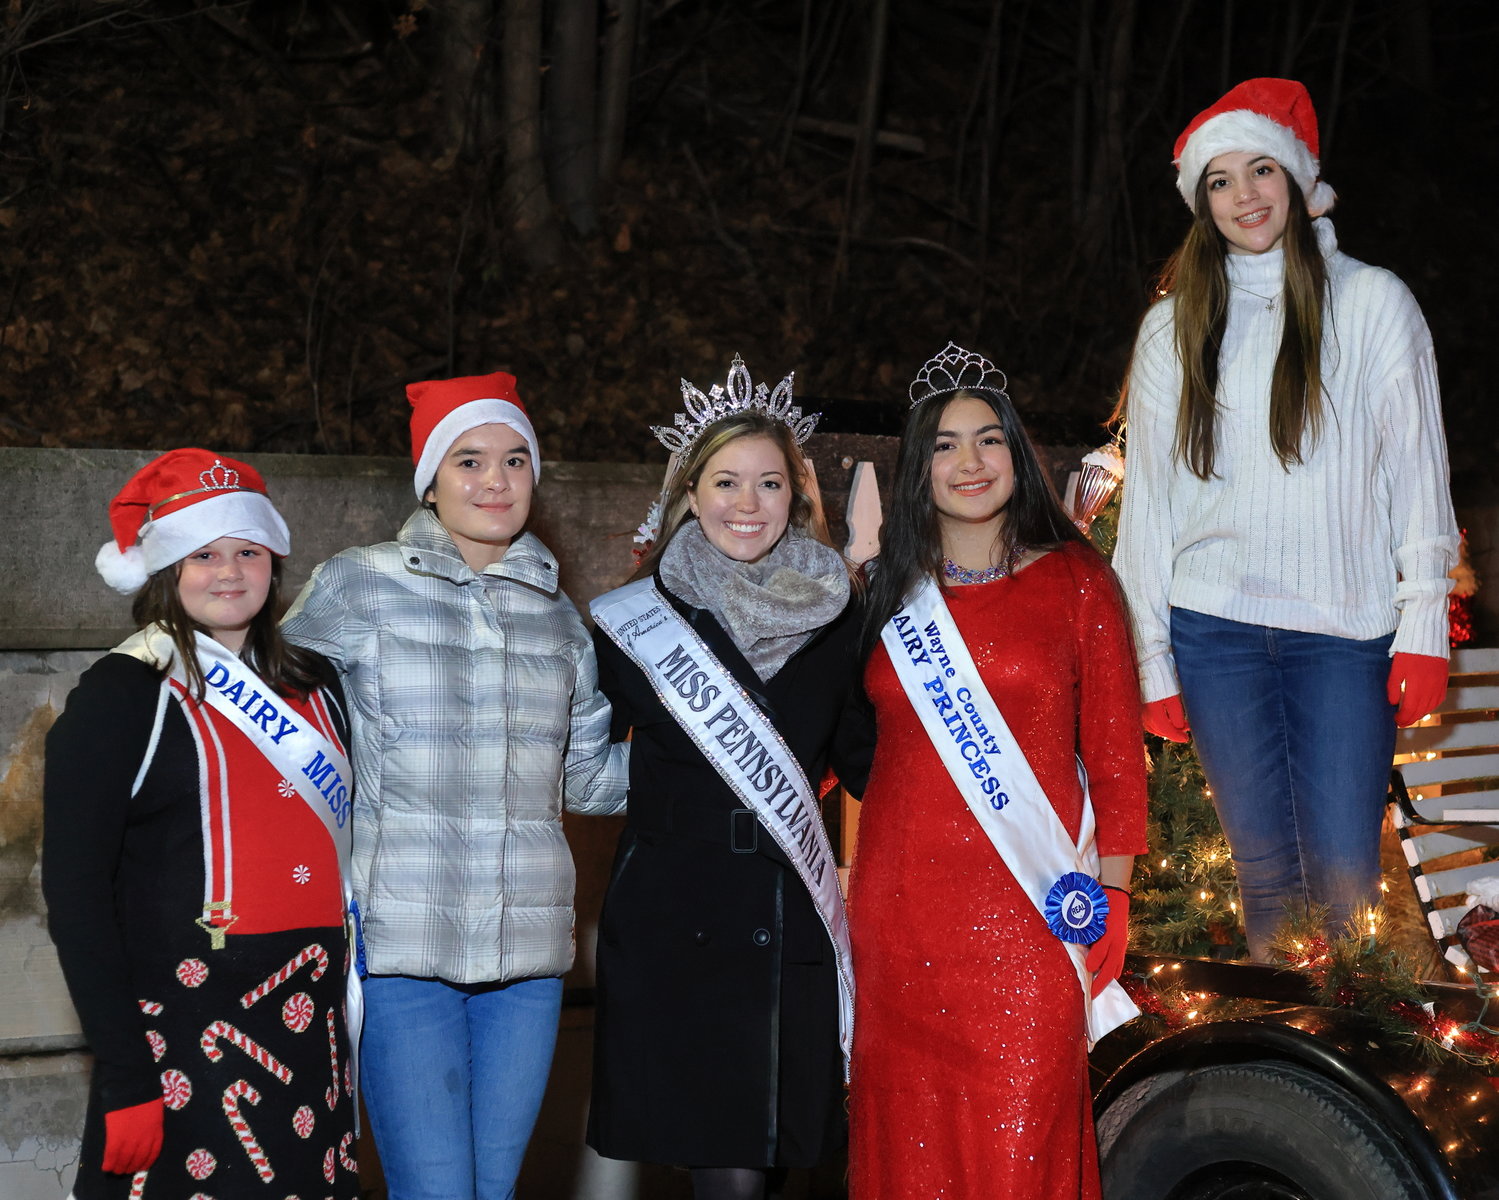 Miss Pennsylvania poses with Wayne County Dairy Princesses and Misses—past and present. Pictured are Kenley Roberts, 2022 Wayne County Dairy Miss, left; Madison Roberts, 2021 Wayne County Dairy Princess; Sydney Miller, 2023 Miss Pennsylvania; Elektra Kehagias, 2022 Wayne County Dairy Princess; and Sydney Roberts, 2021 Wayne County Dairy Miss...